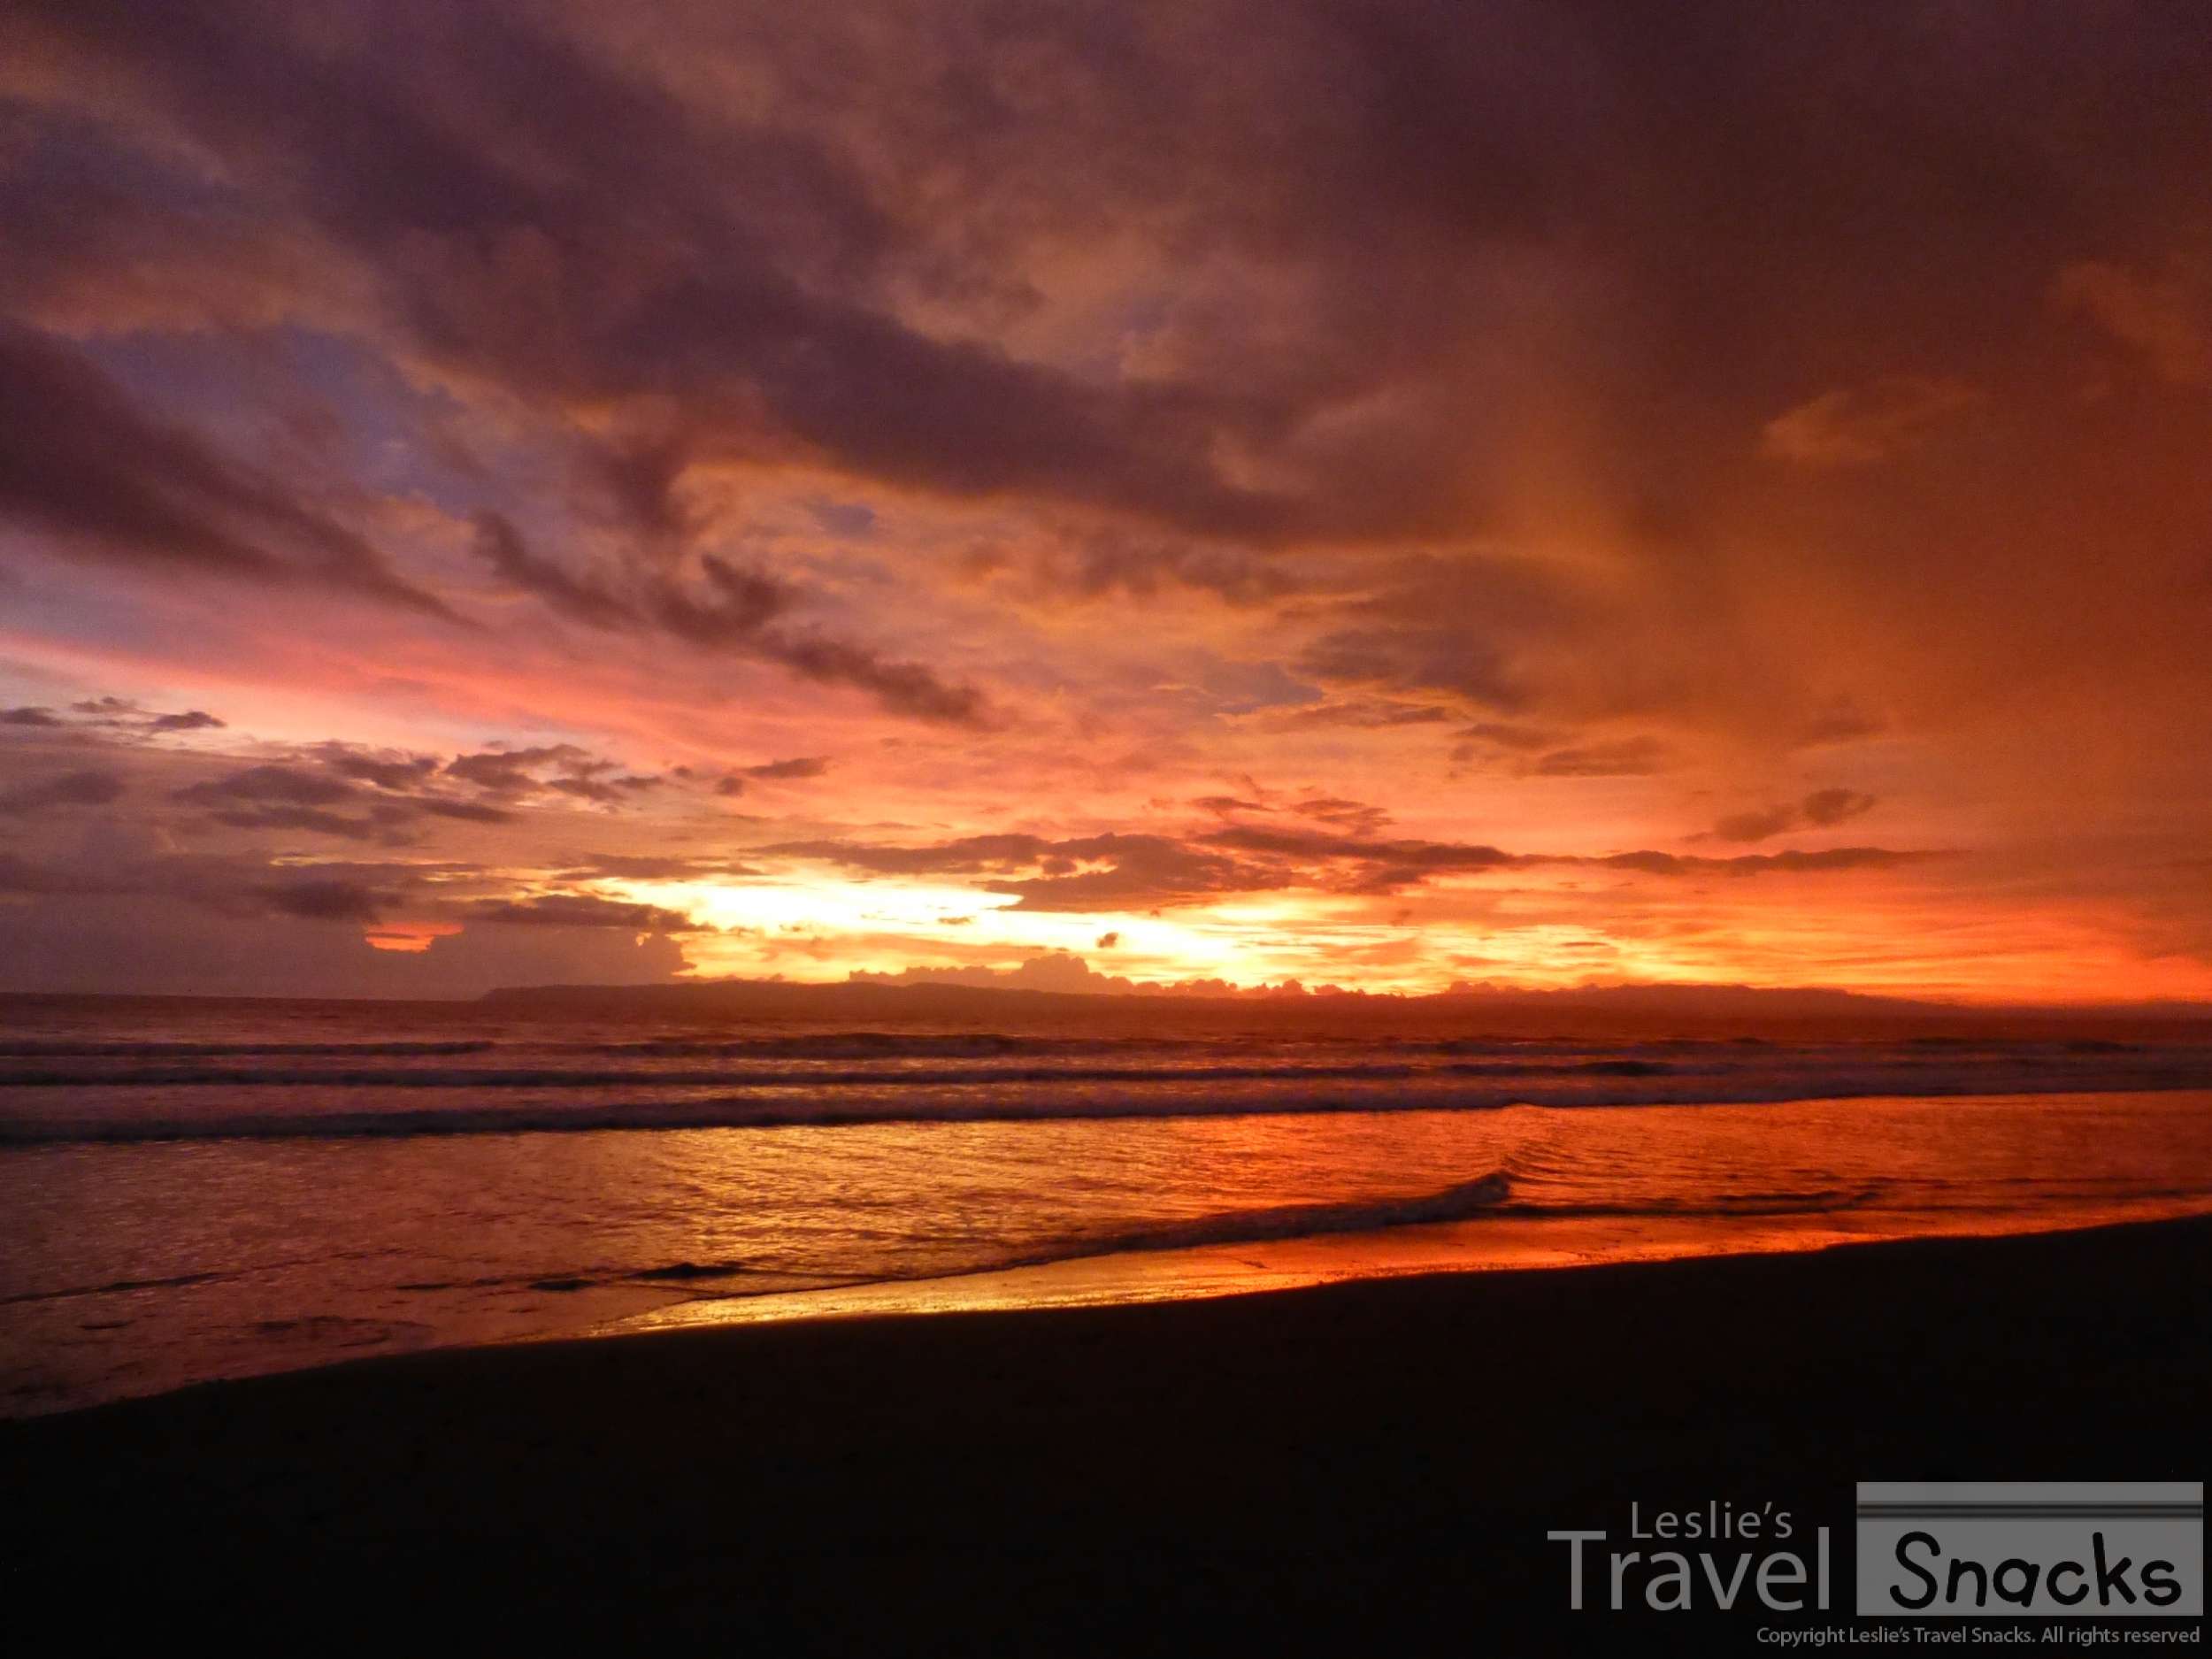 Wow, the sunsets over the ocean in Costa Rica!